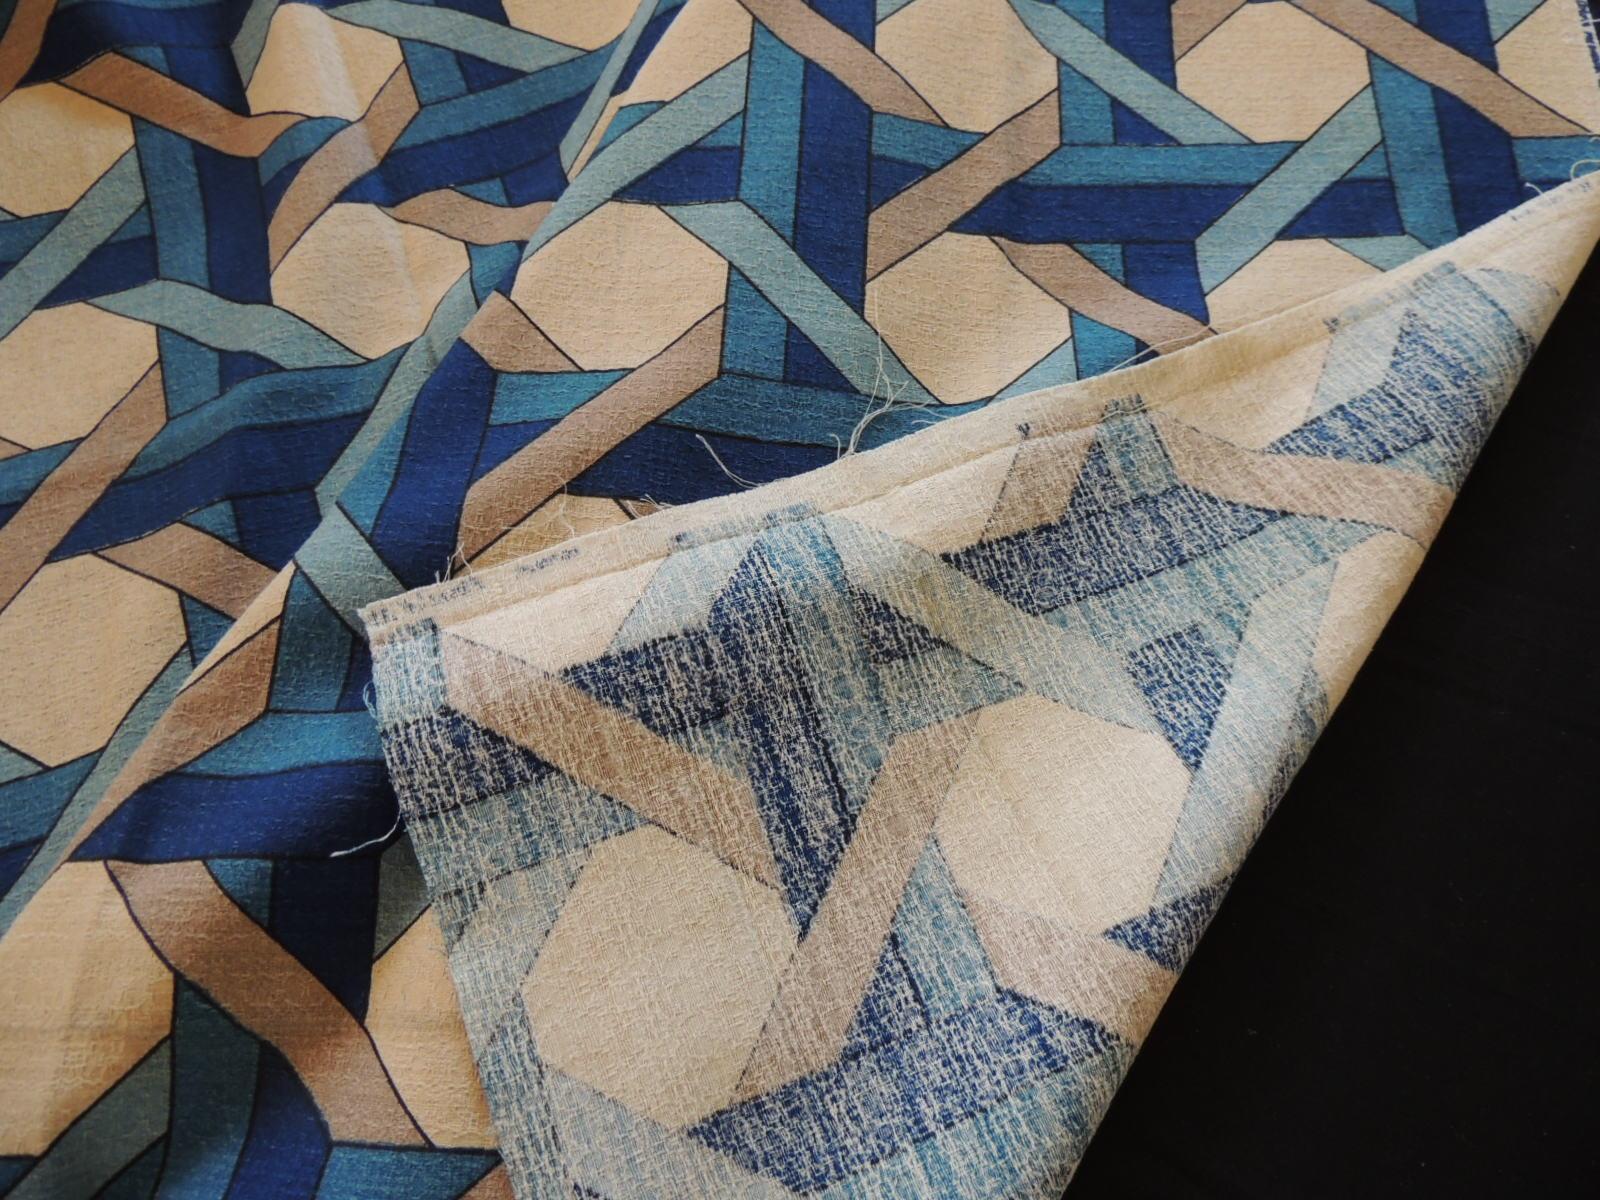 American Fabric by The Yard, Vintage Blue and Tan Trellis Pattern Bark Cloth Textile